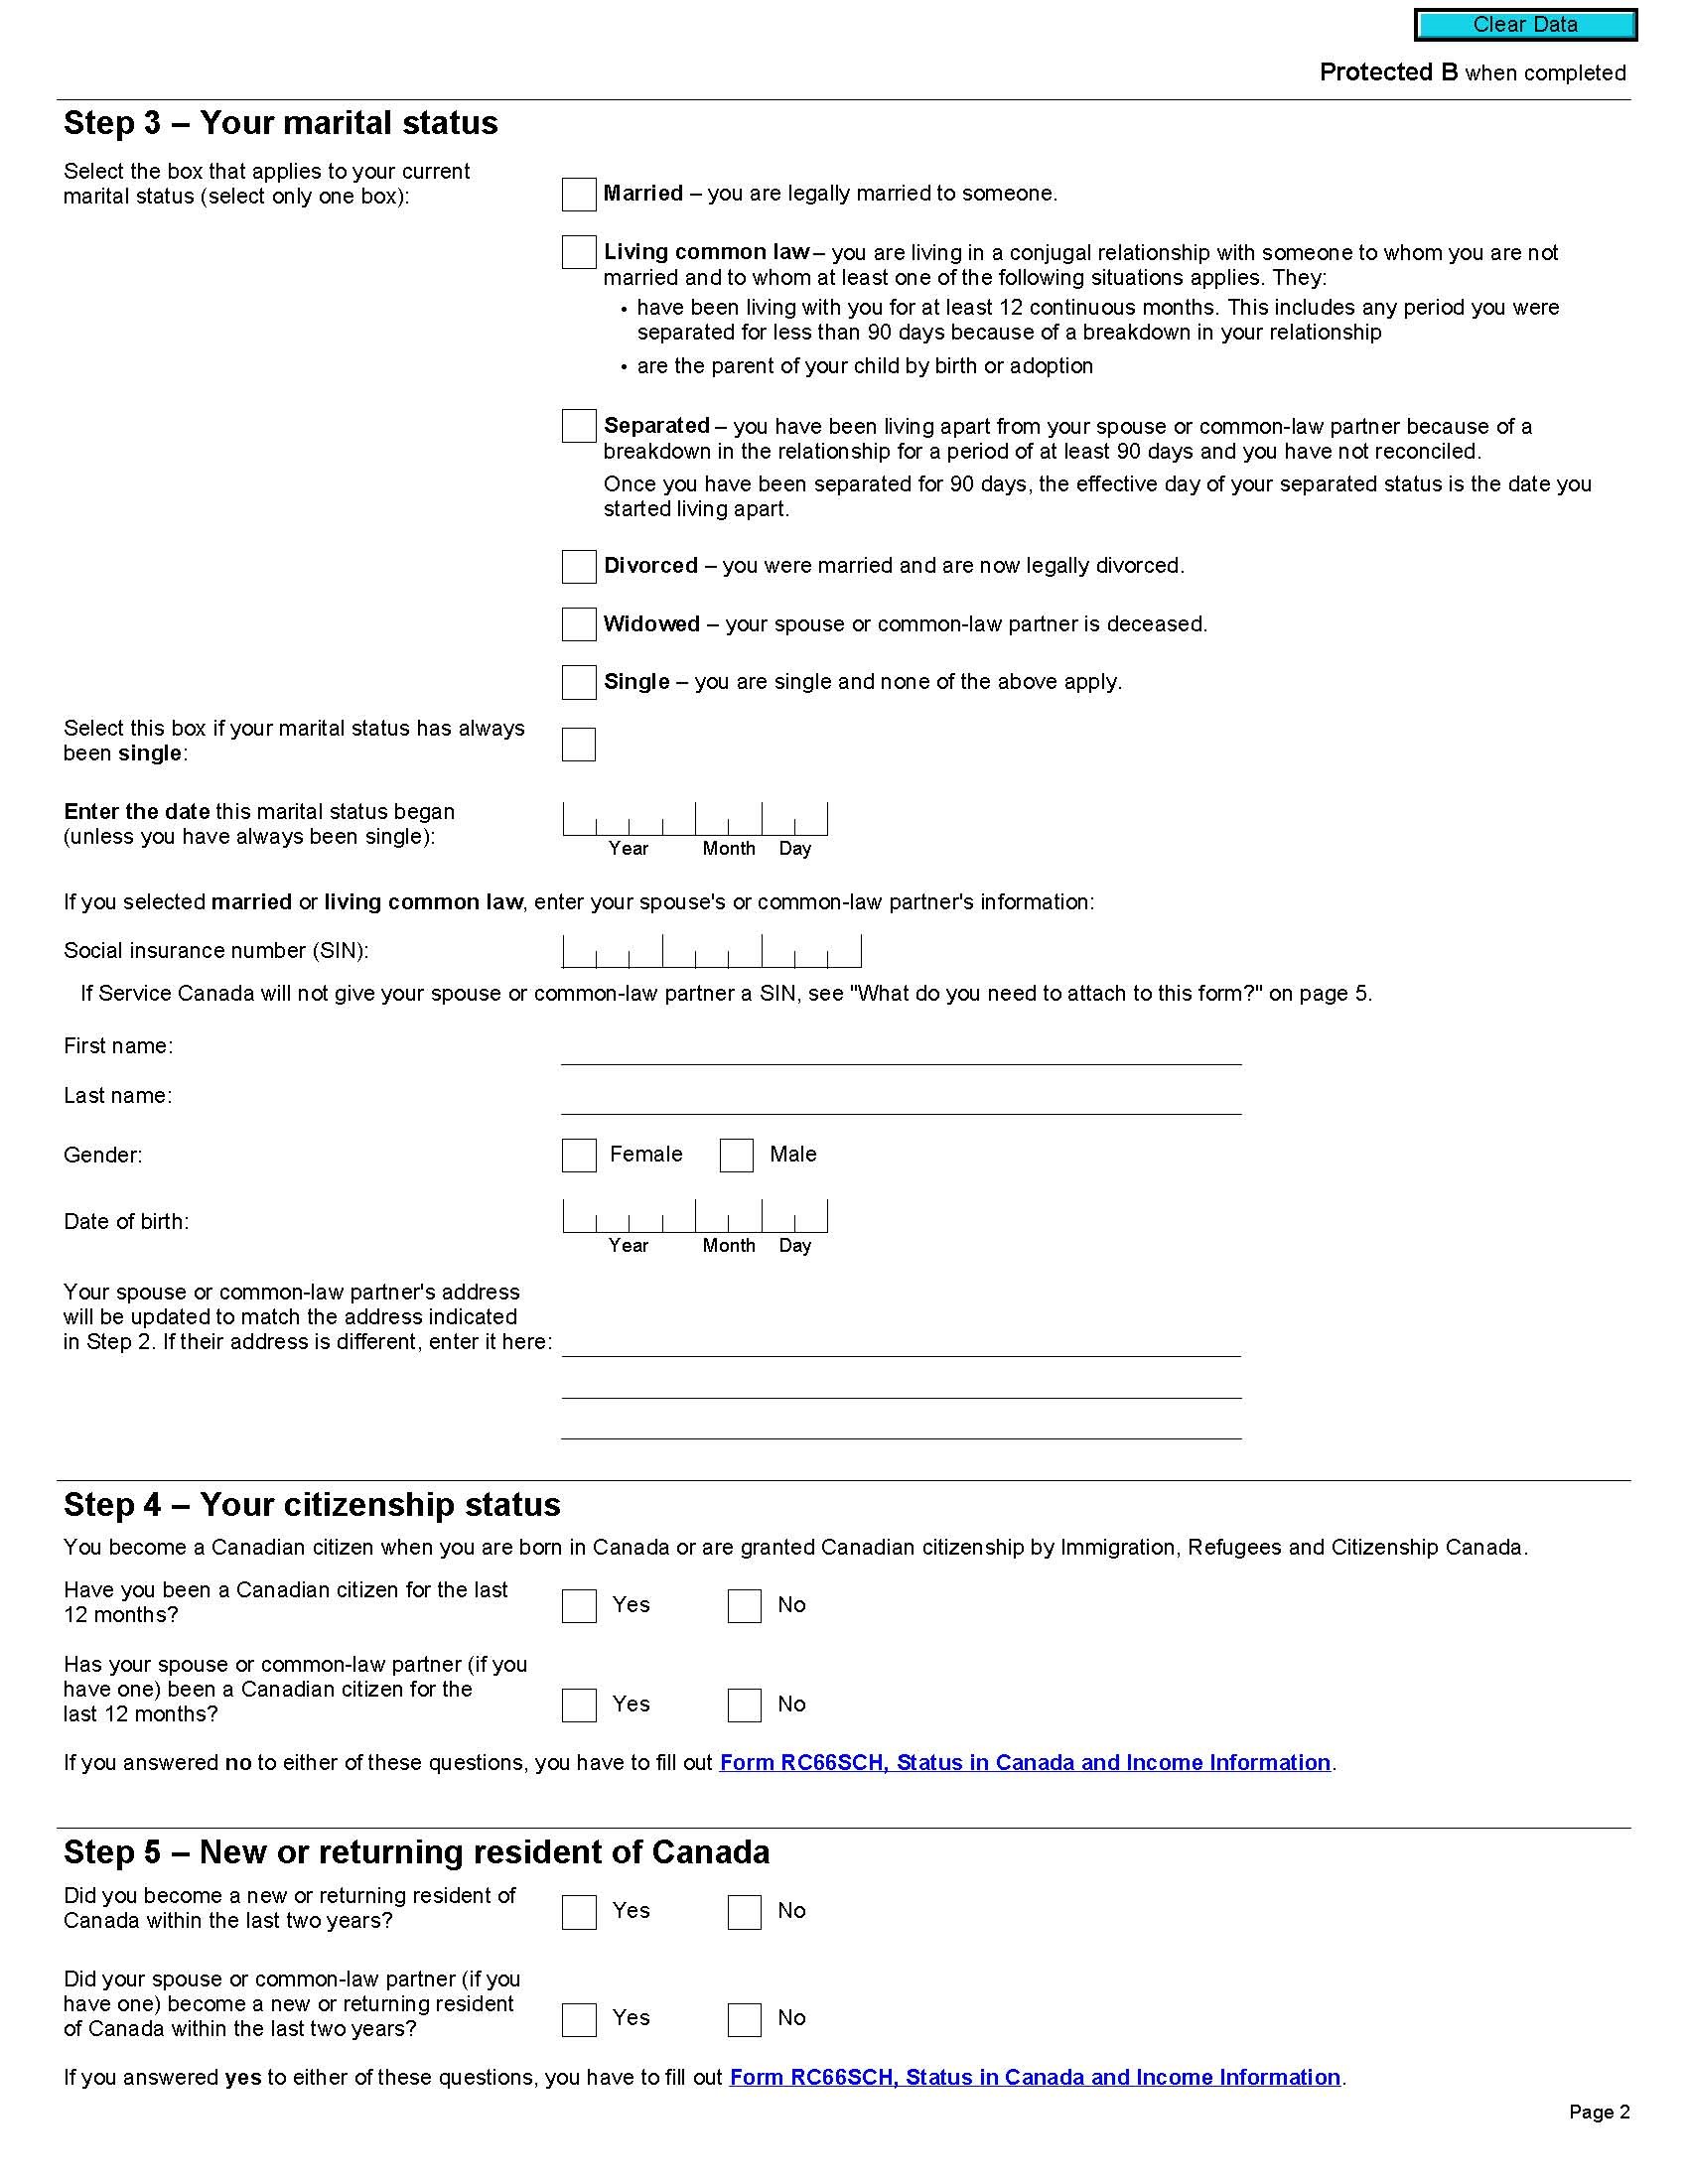 page 2 of Canada Child Benefit Application Form (RC66)